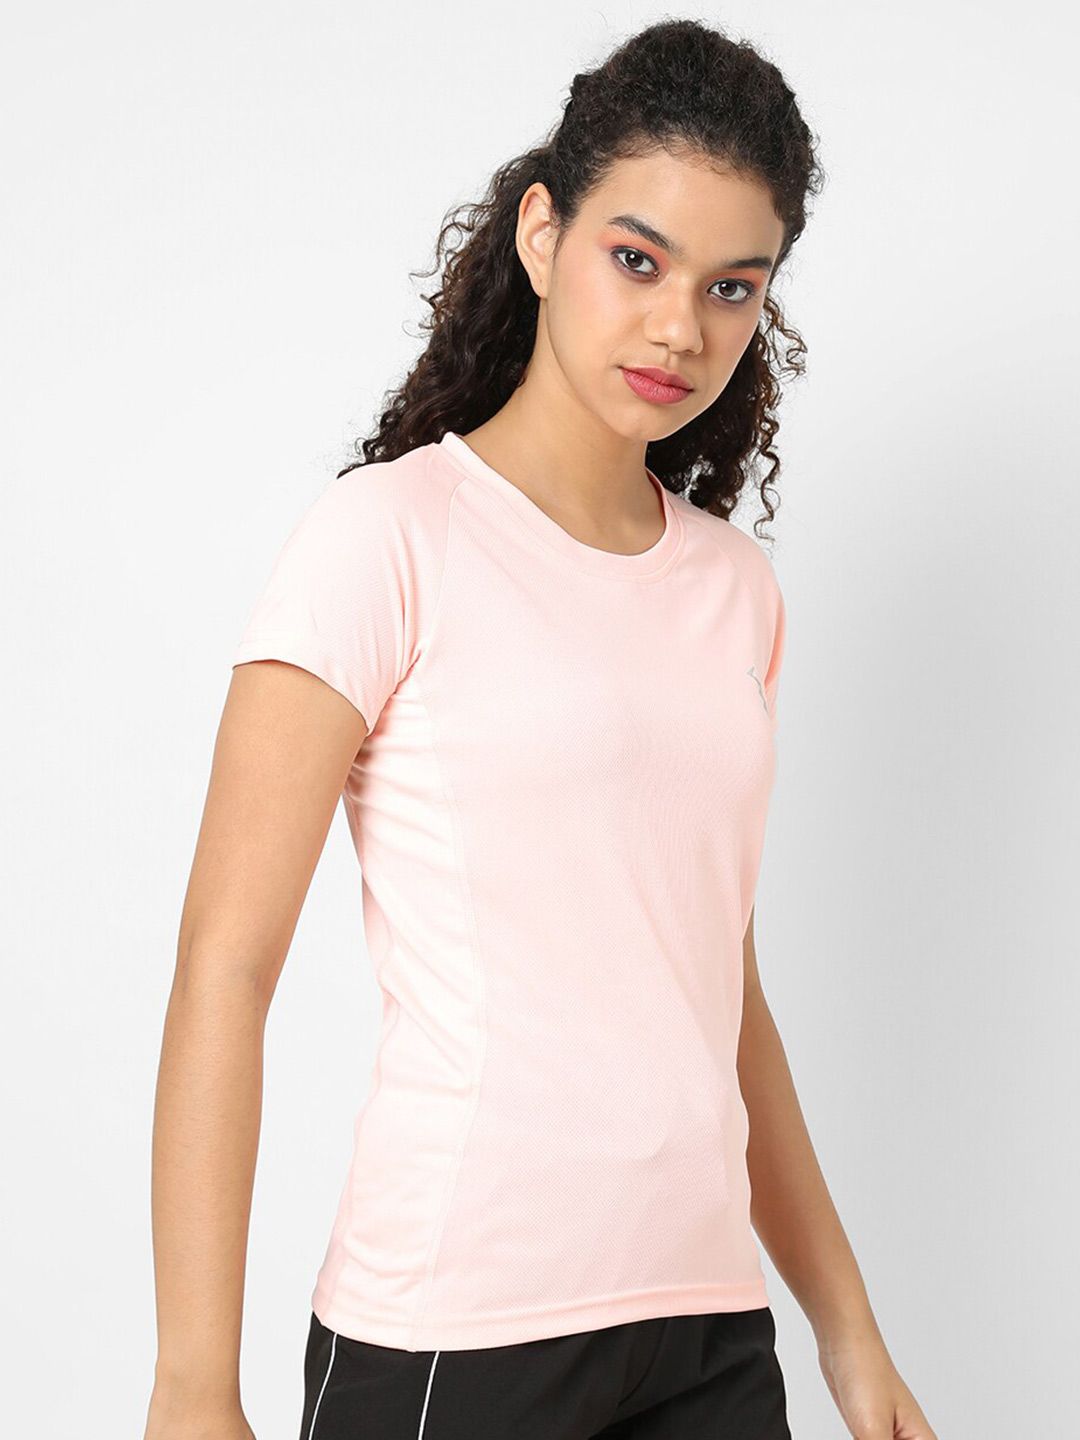 Campus Sutra Women Peach-Coloured Running T-shirt Price in India